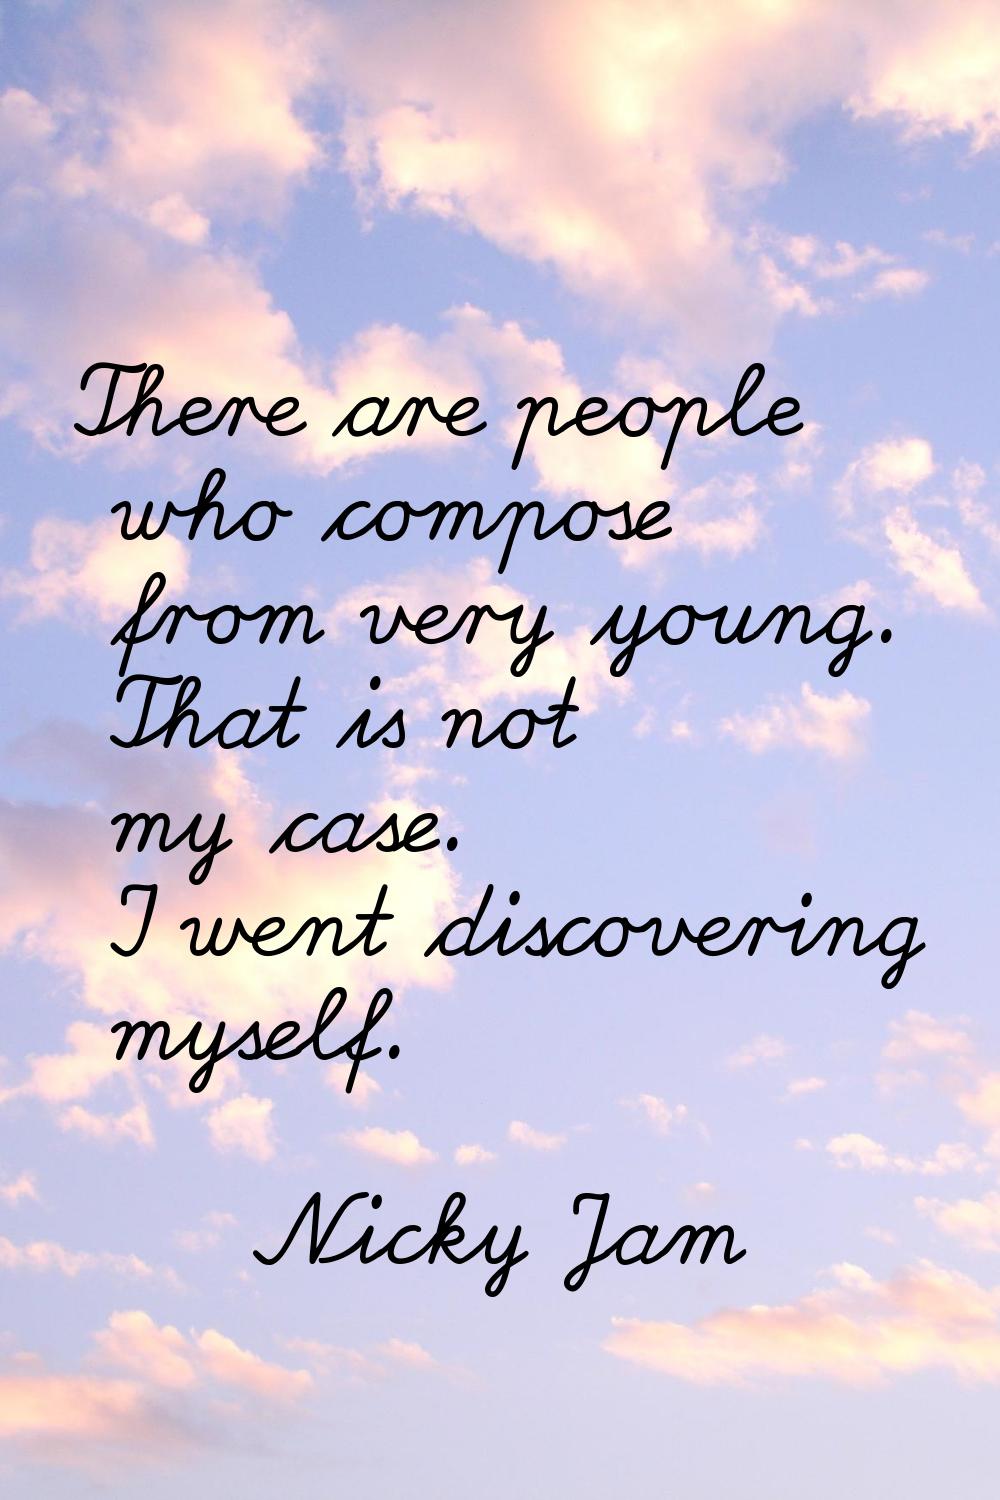 There are people who compose from very young. That is not my case. I went discovering myself.